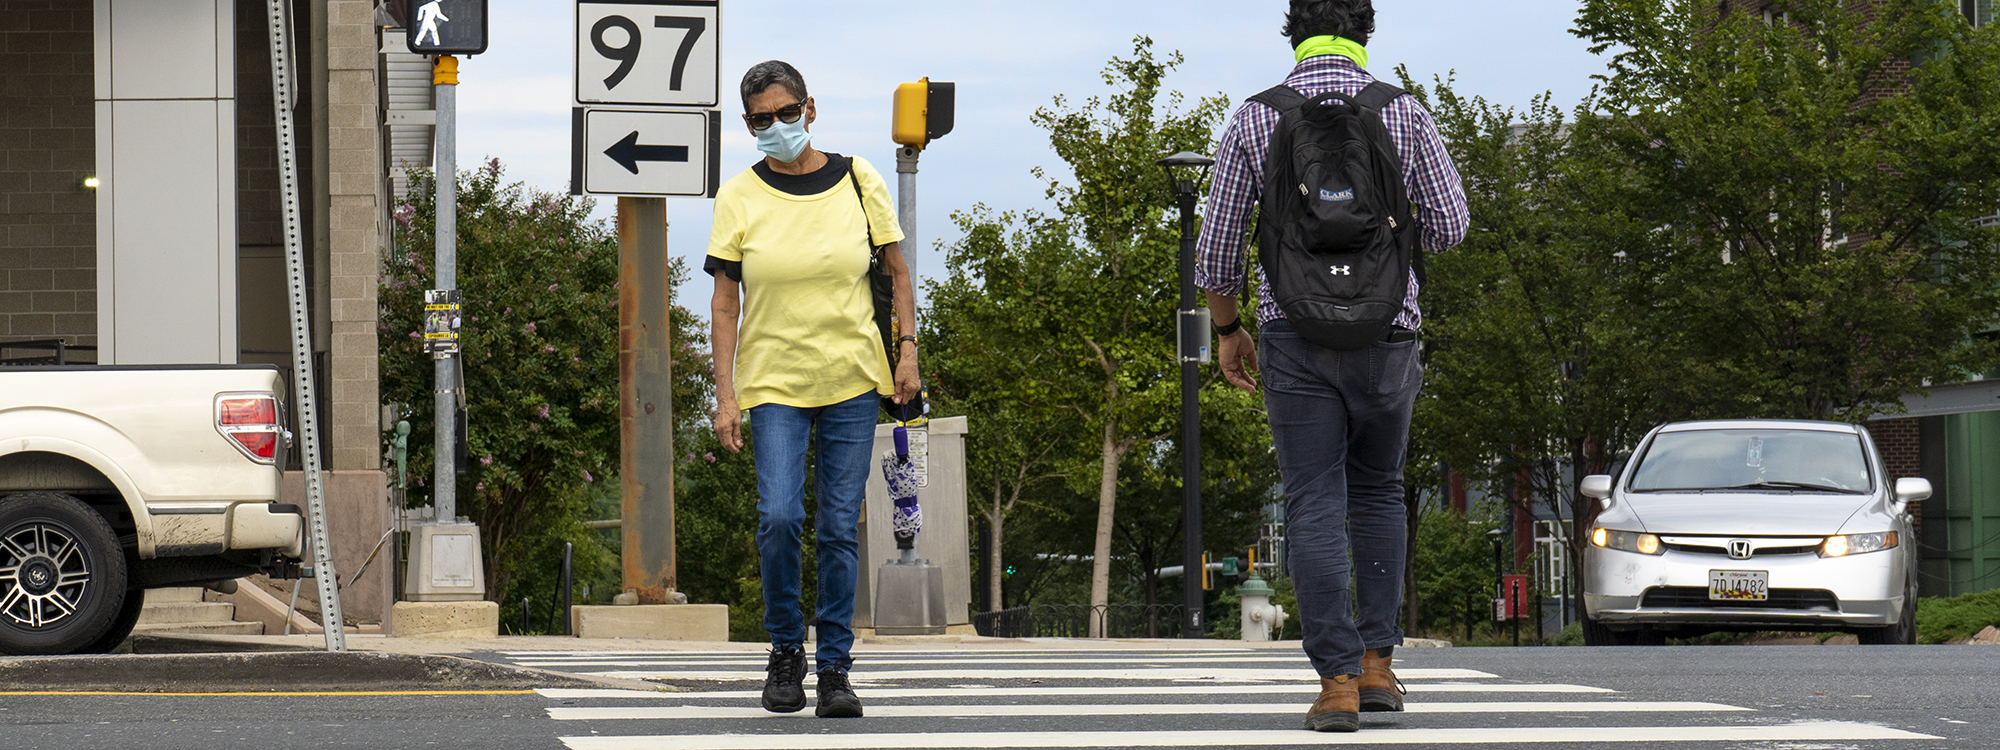 Pedestrian with face covering in crosswalk